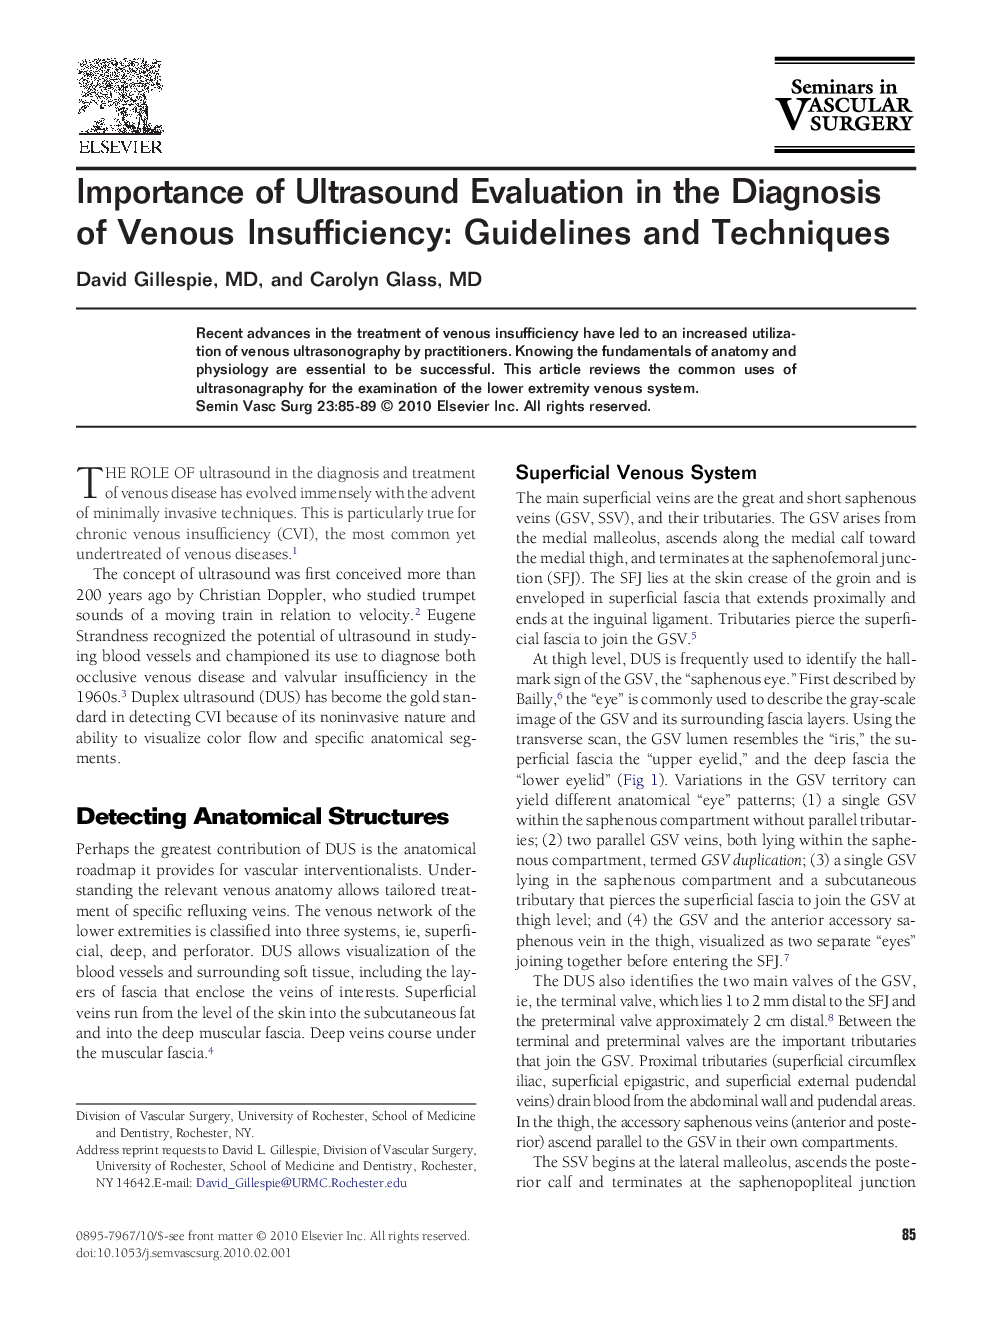 Importance of Ultrasound Evaluation in the Diagnosis of Venous Insufficiency: Guidelines and Techniques